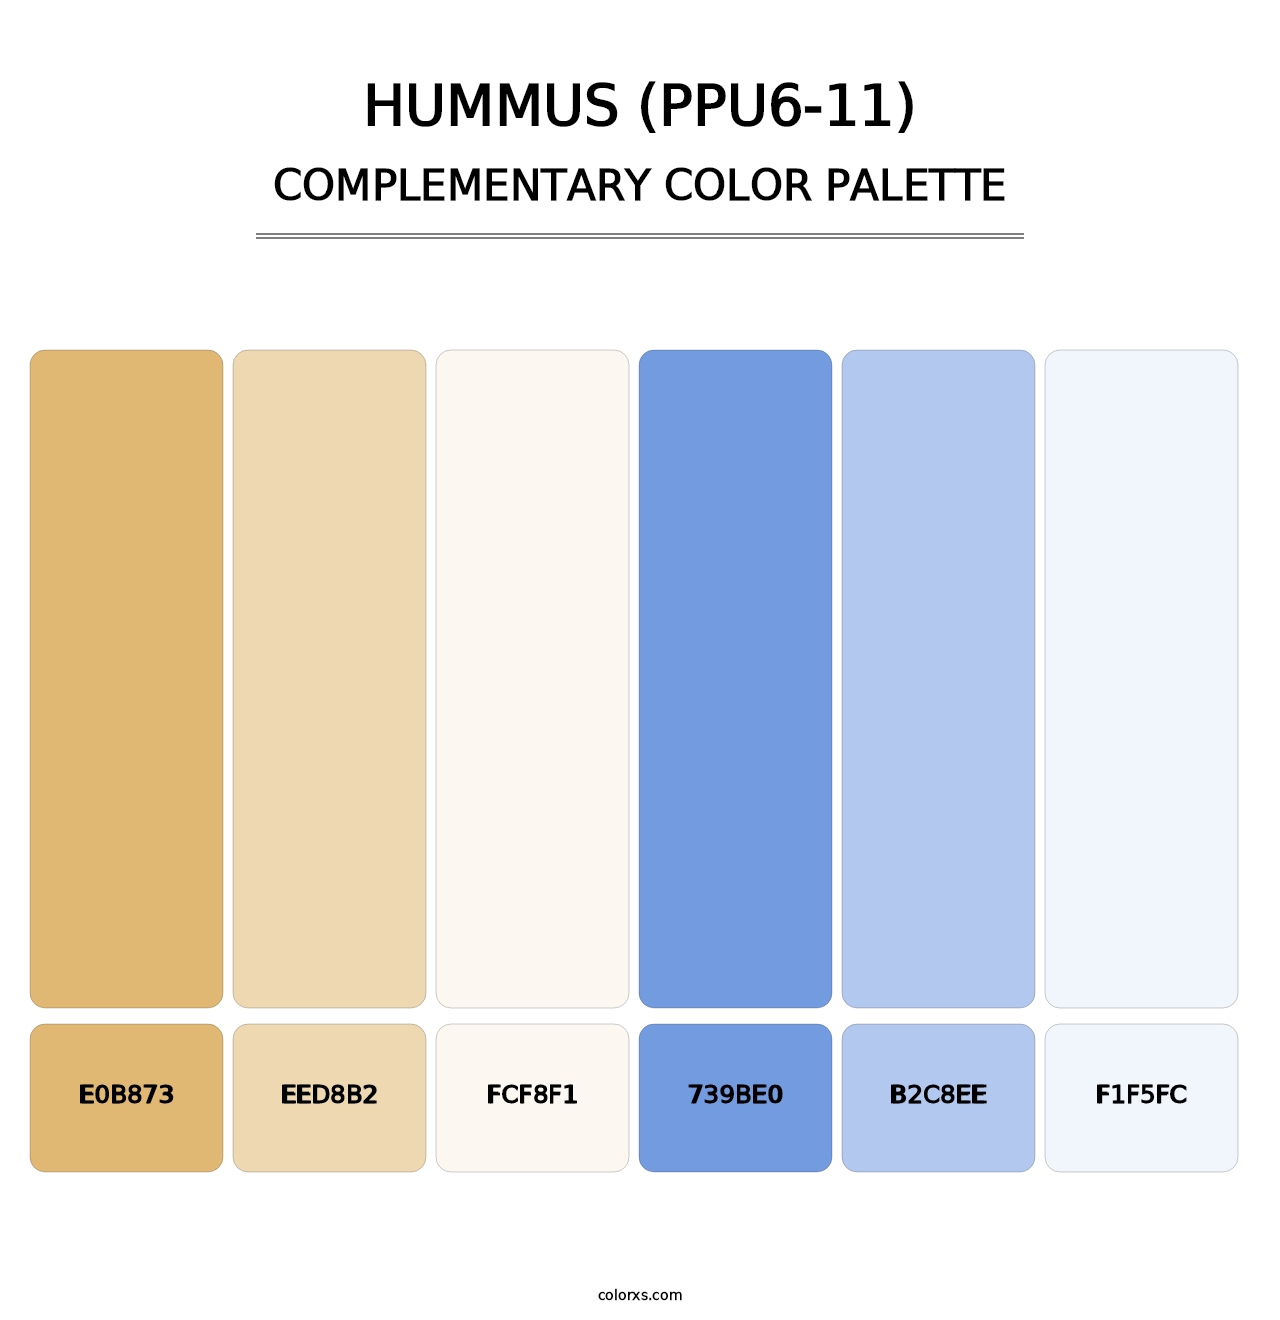 Hummus (PPU6-11) - Complementary Color Palette